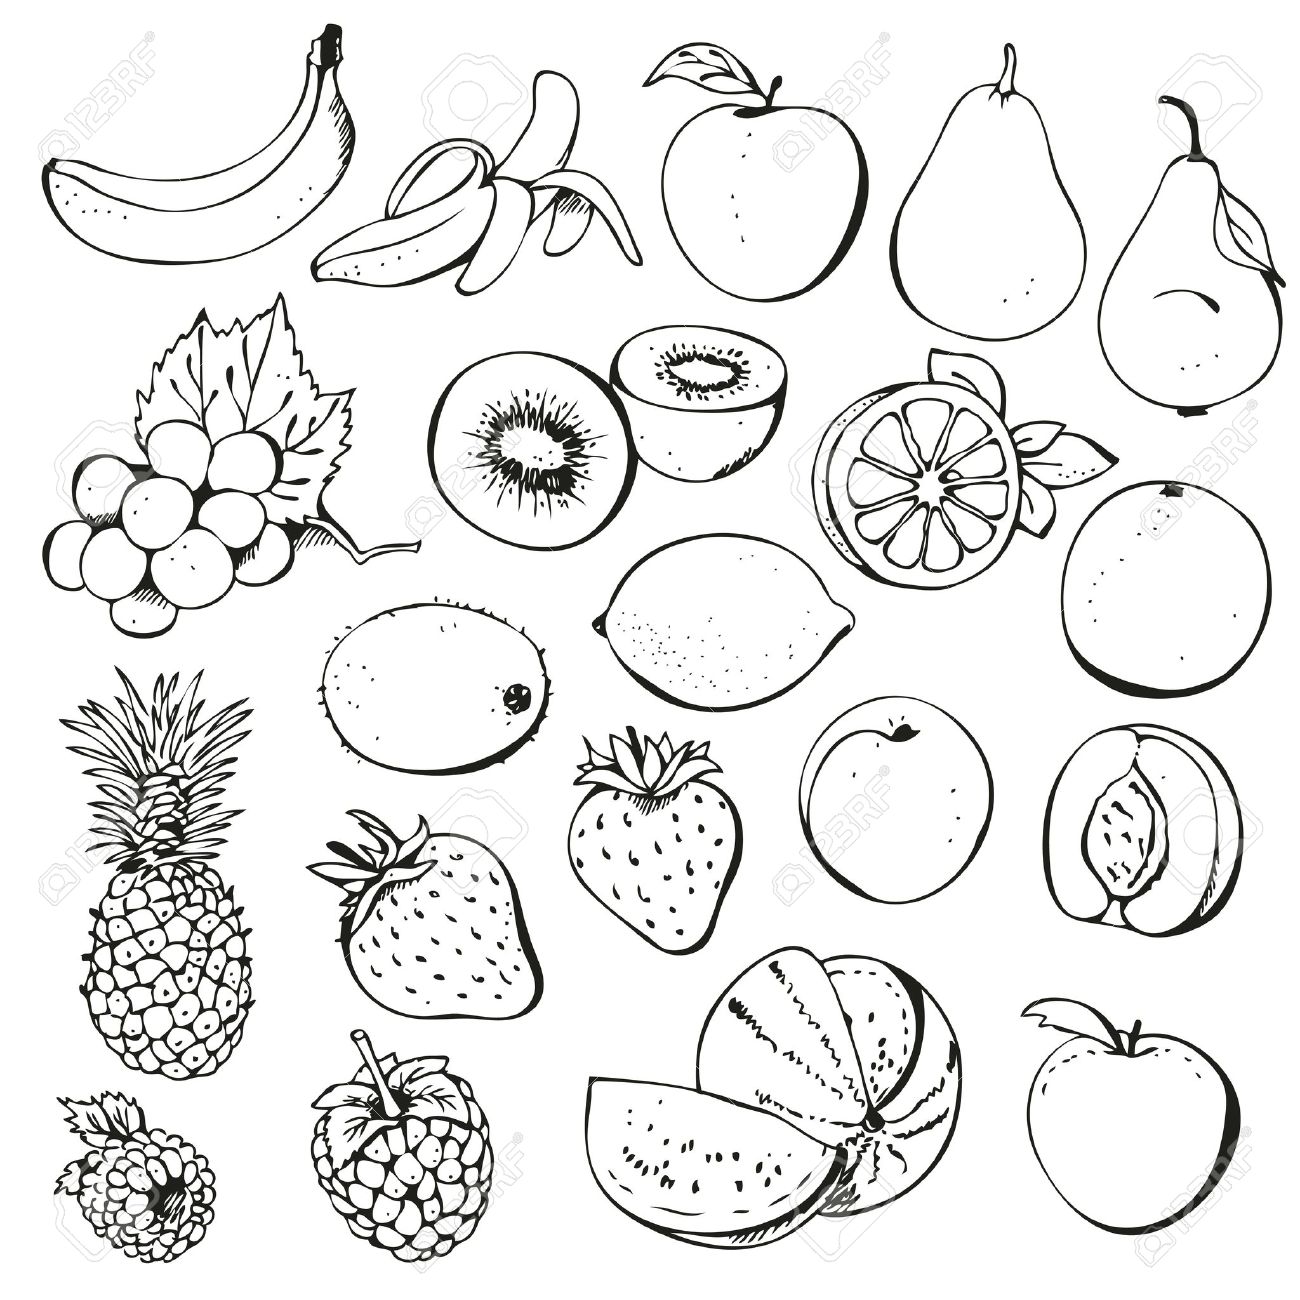 clipart of fruits black and white - photo #37